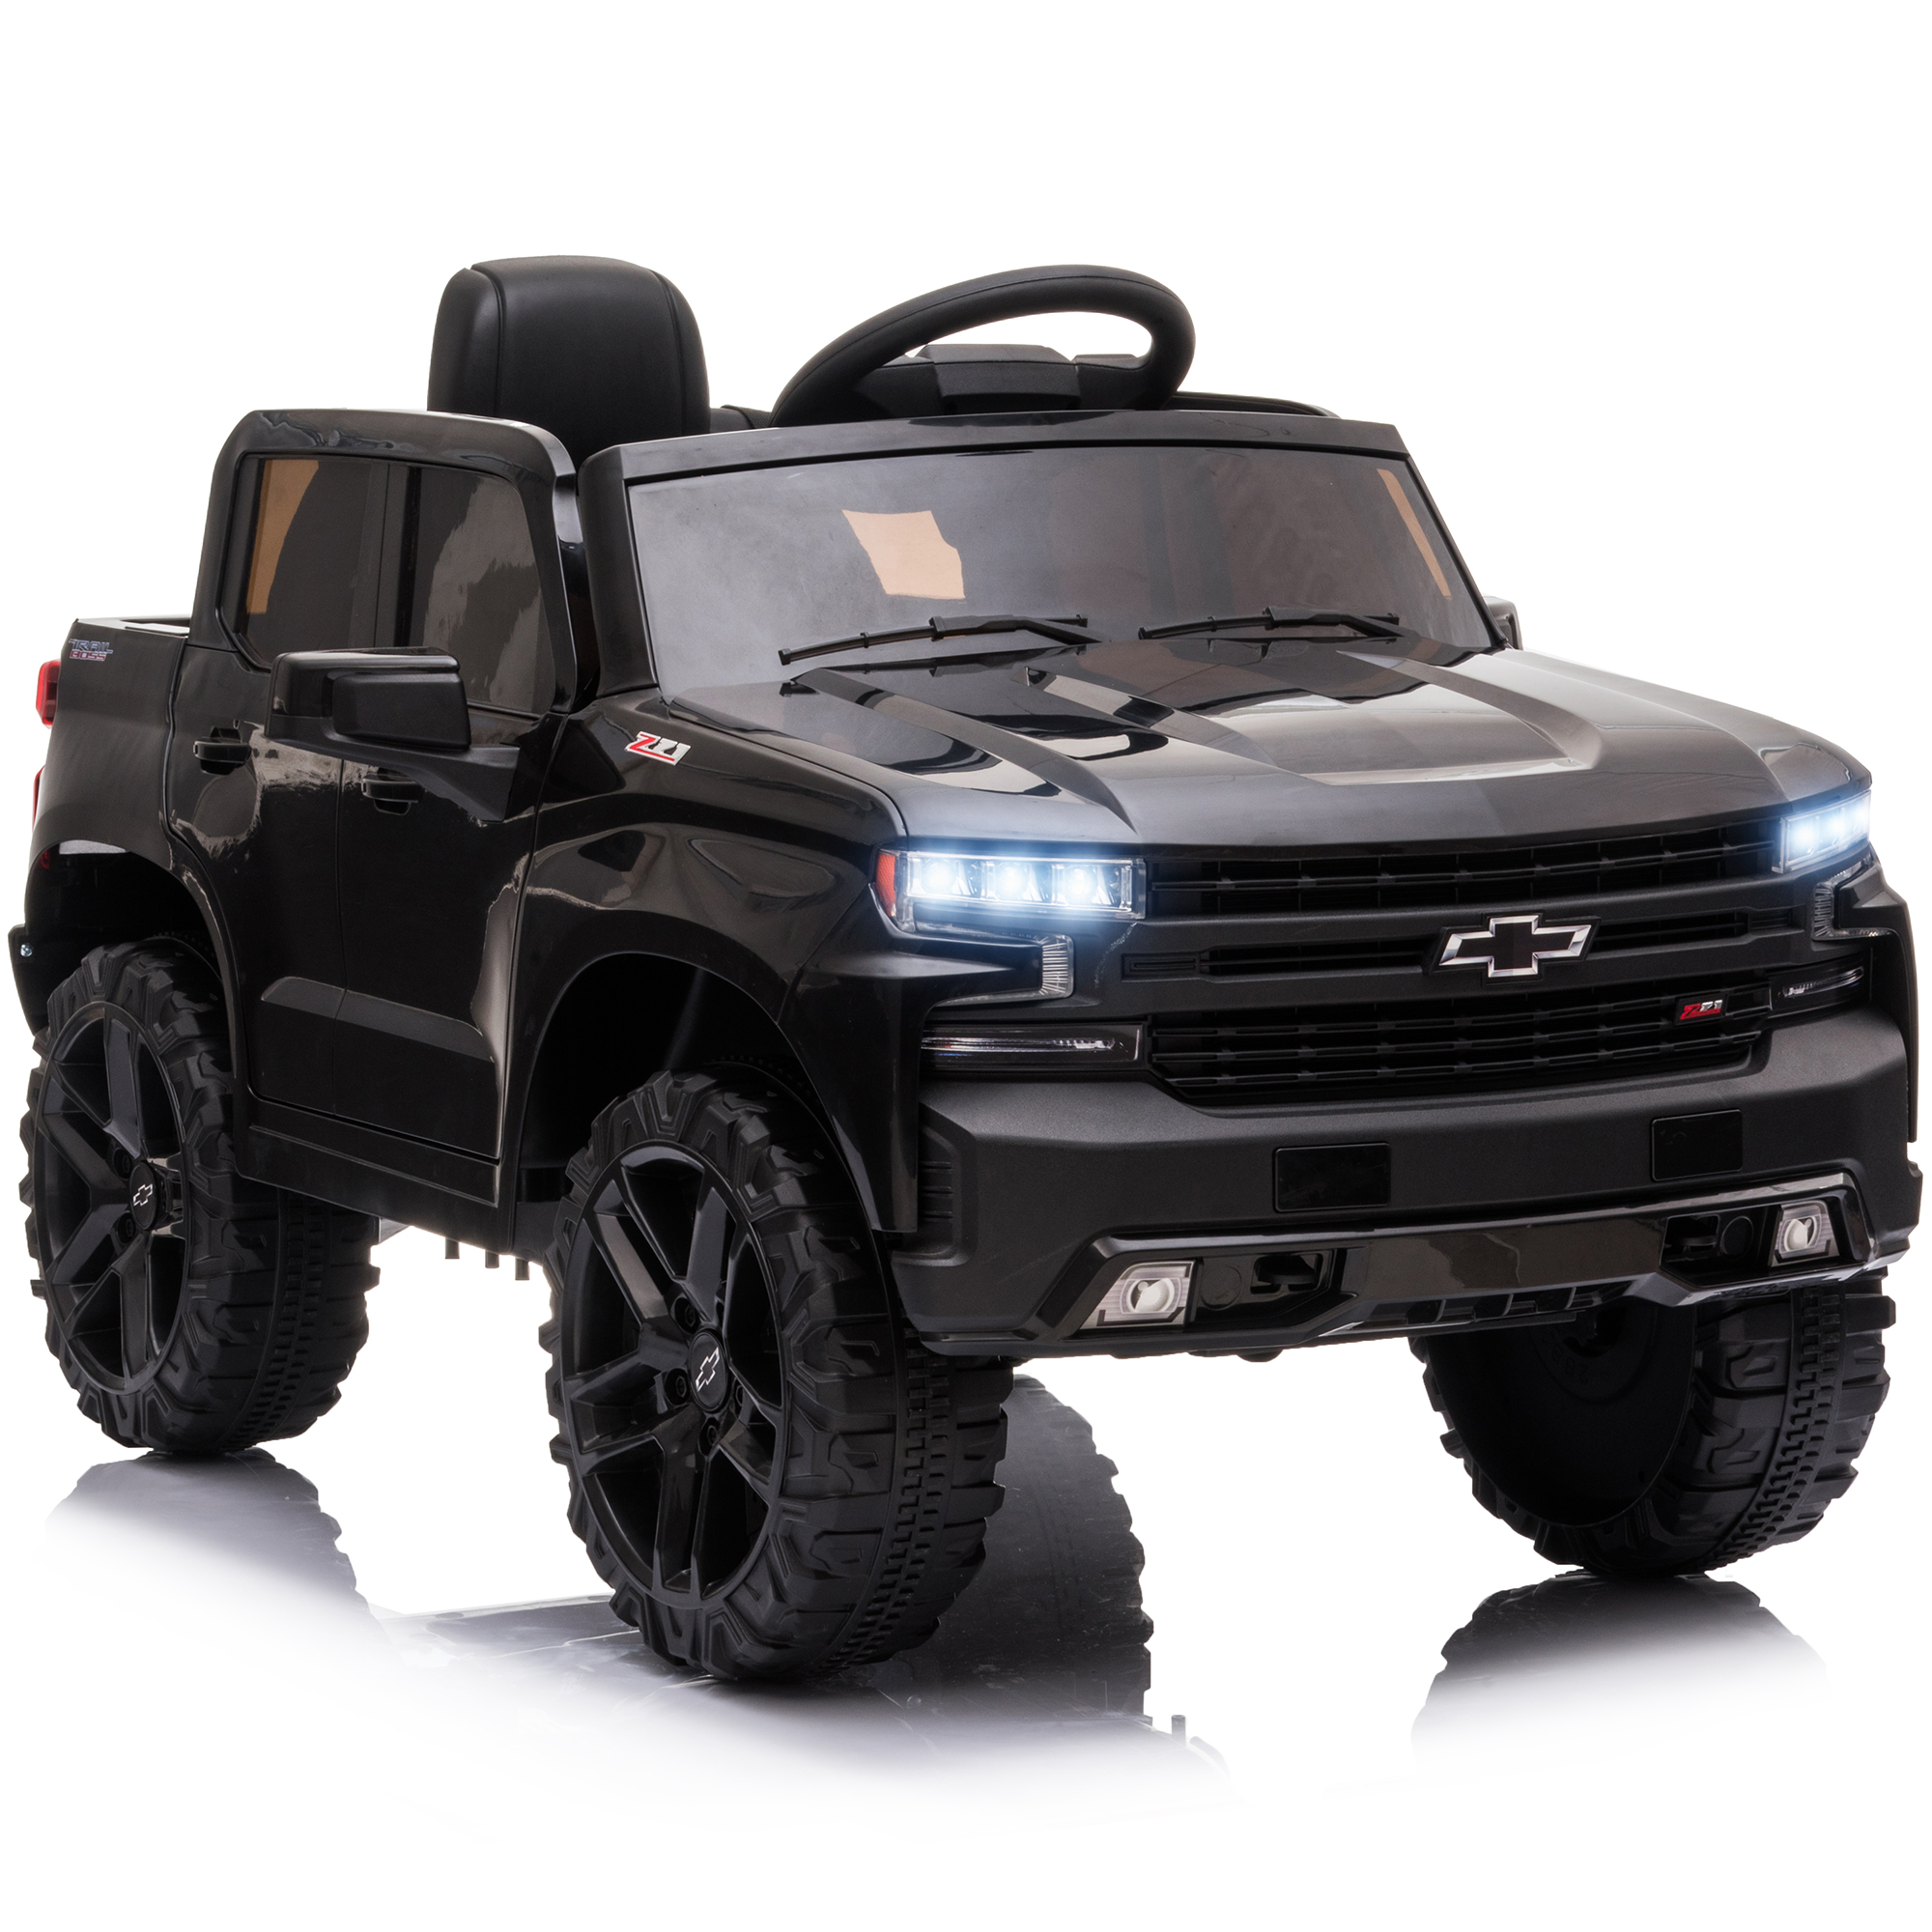 Official Licensed Chevrolet Ride On Car, 12V Ride-On Truck Toy for Kids, Electric 4 Wheels Kids Toy w/Parent Remote Control, Foot Pedal, MP3 Player, 2 Speeds, Ages 3-5 Years - image 9 of 9